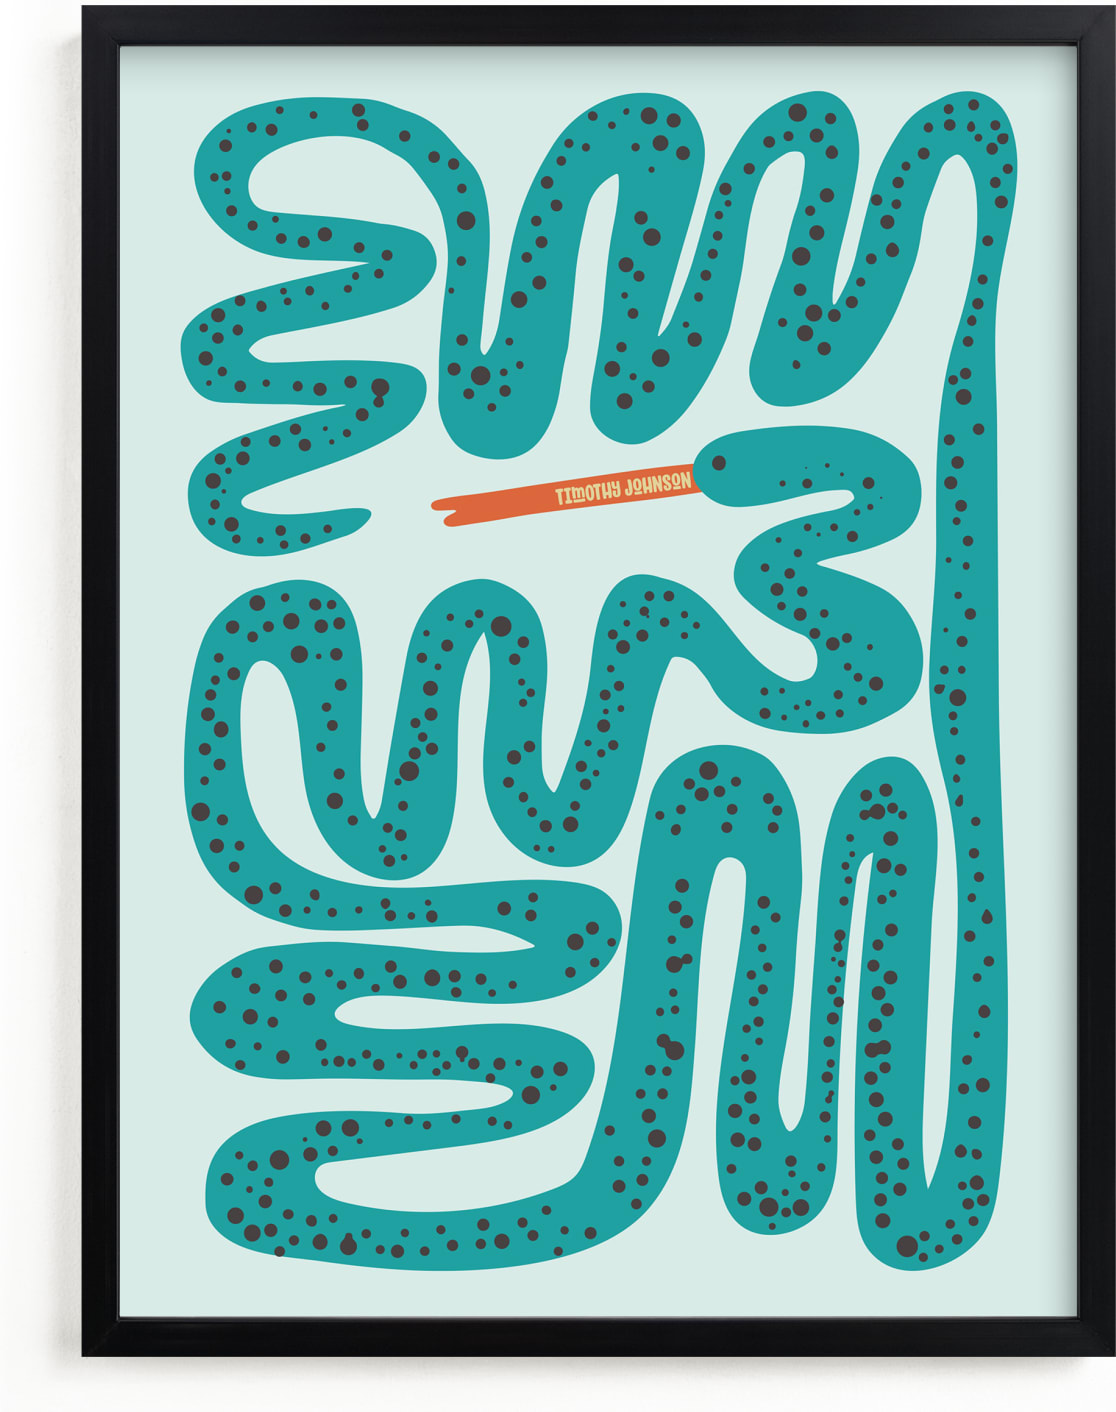 This is a blue personalized art for kid by Jenna Holcomb called Squiggly Snake.